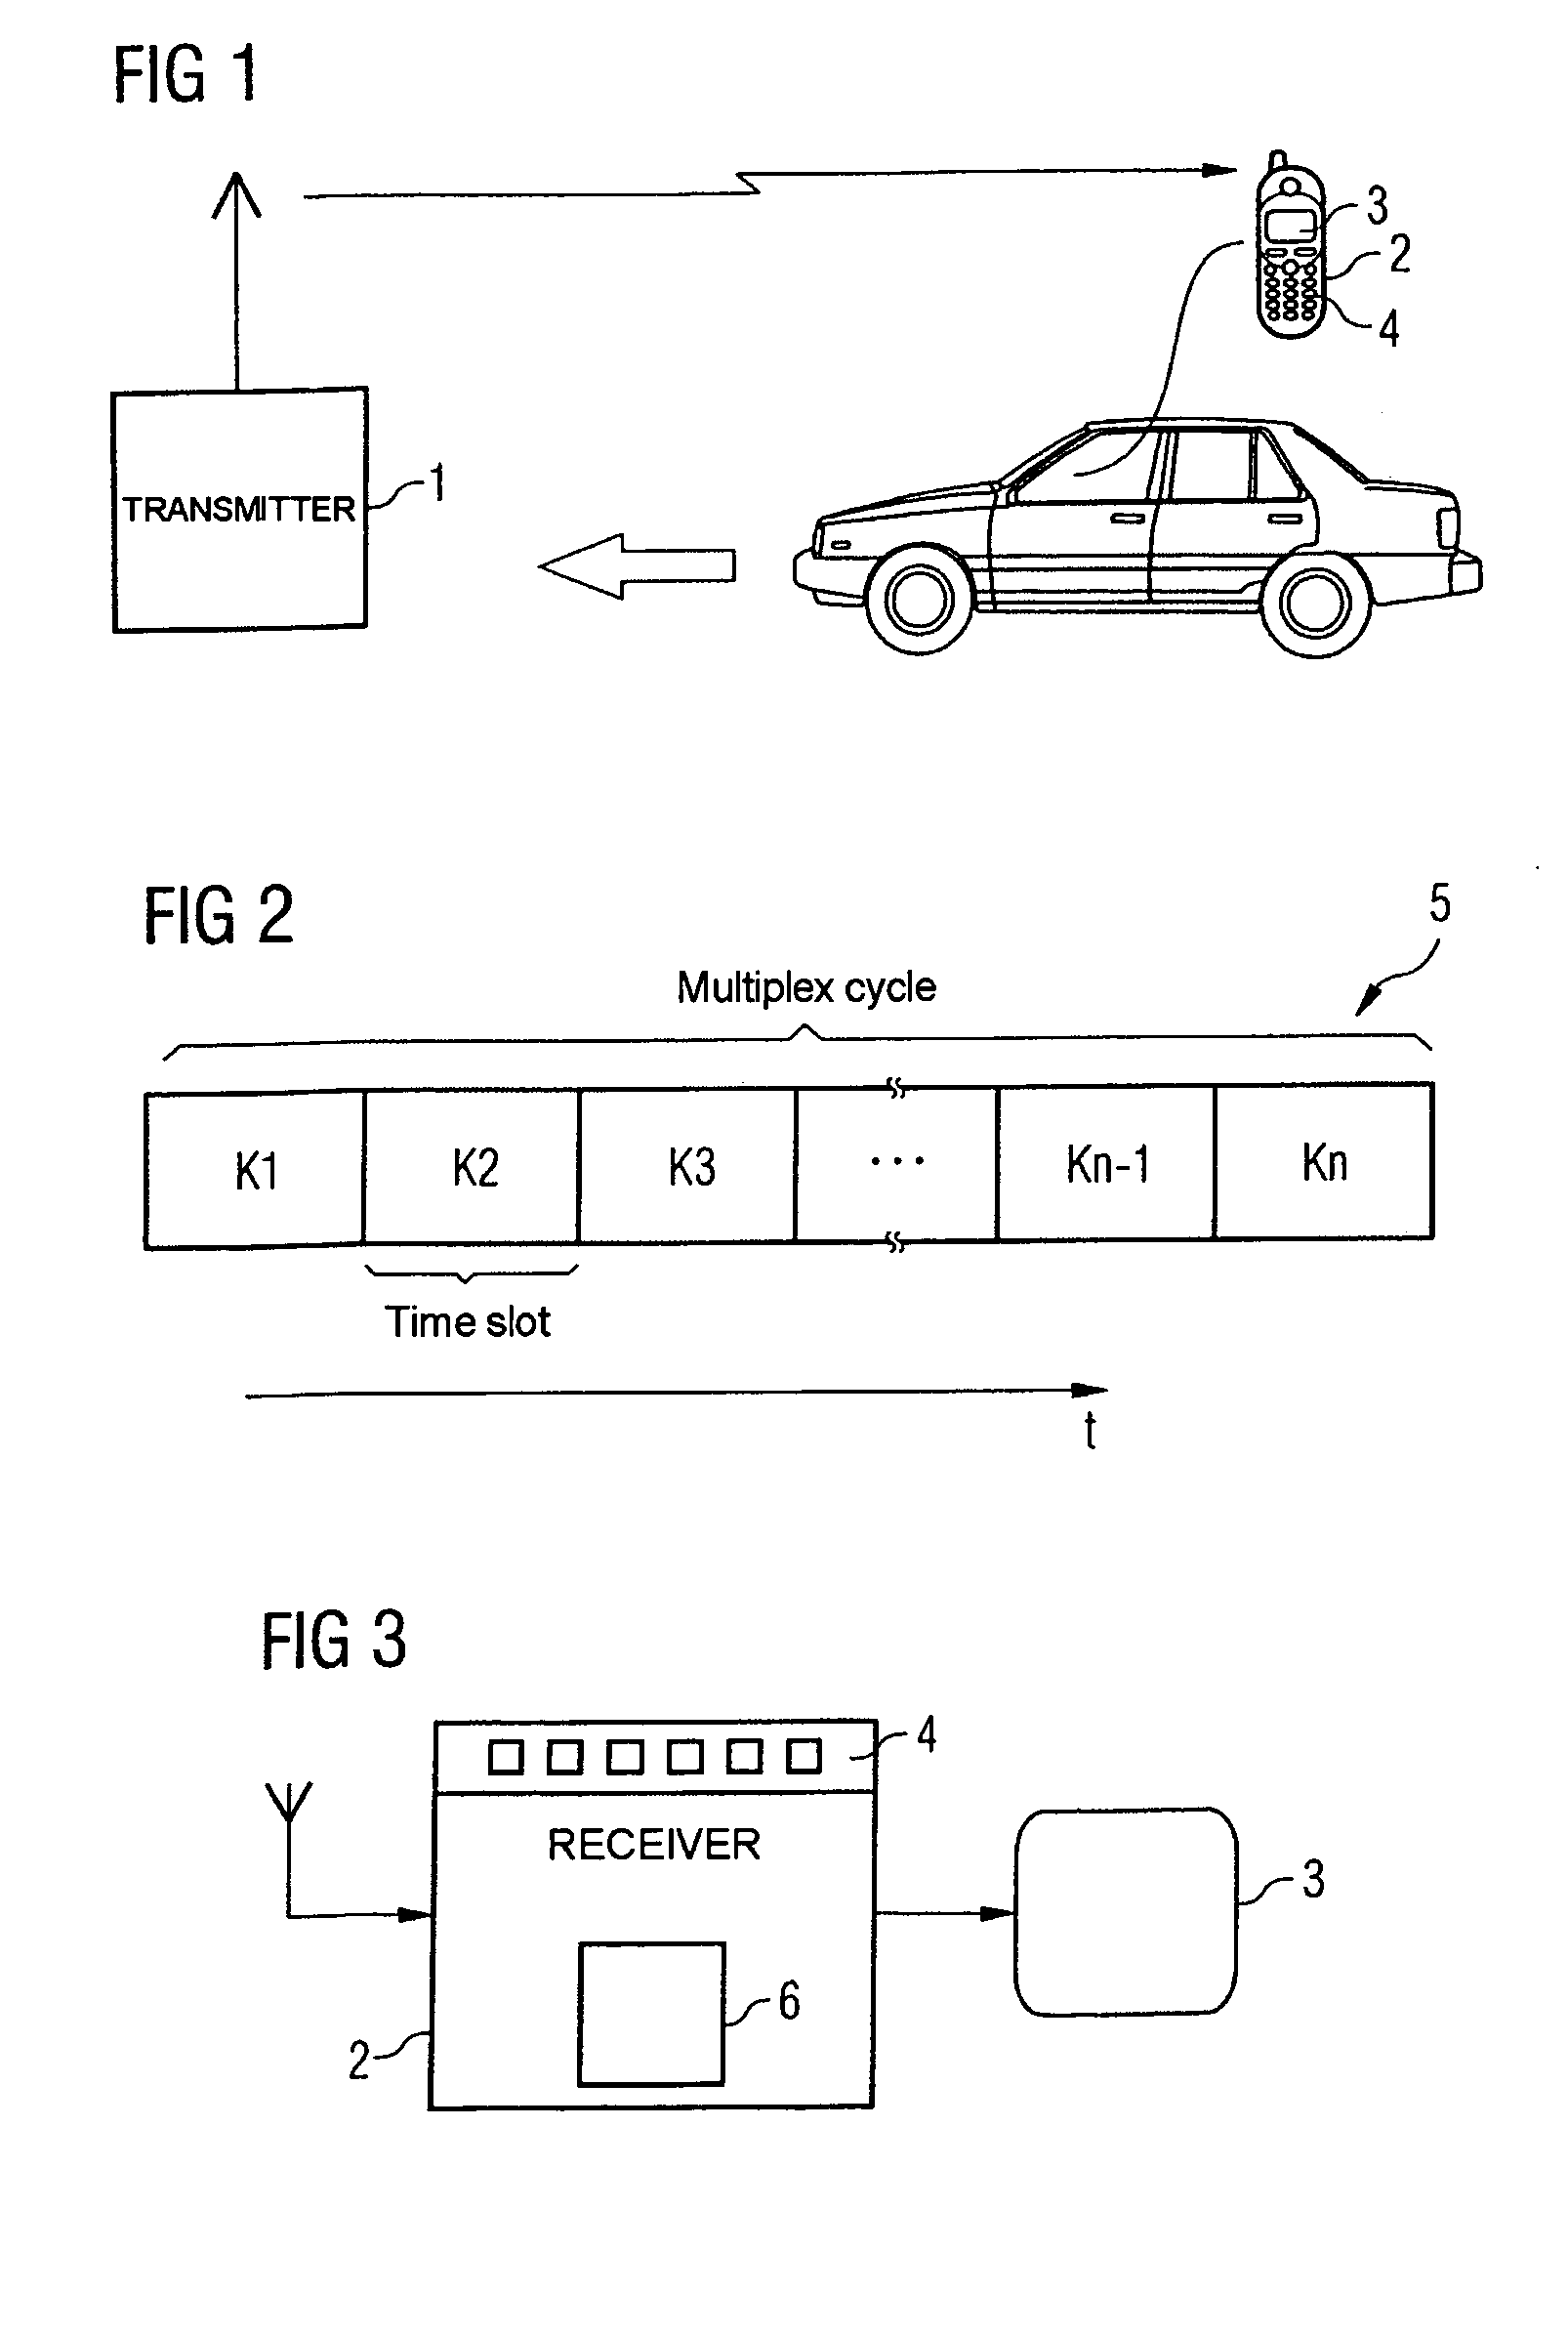 Method for avoiding switch-over delays when changing channels in digital television transmission systems